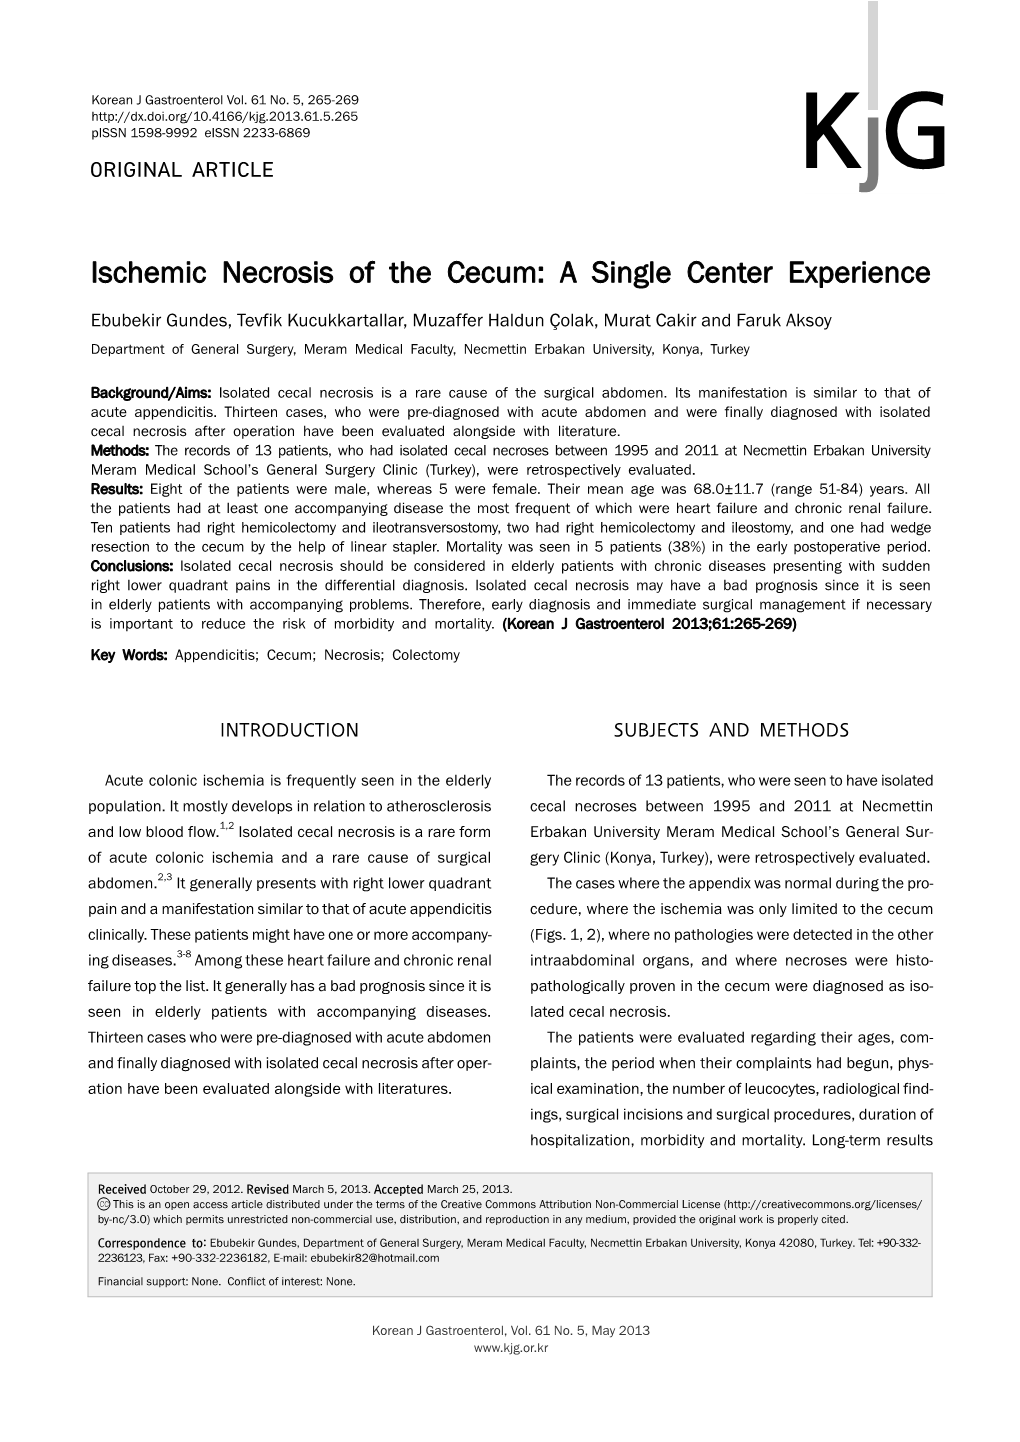 Ischemic Necrosis of the Cecum: a Single Center Experience